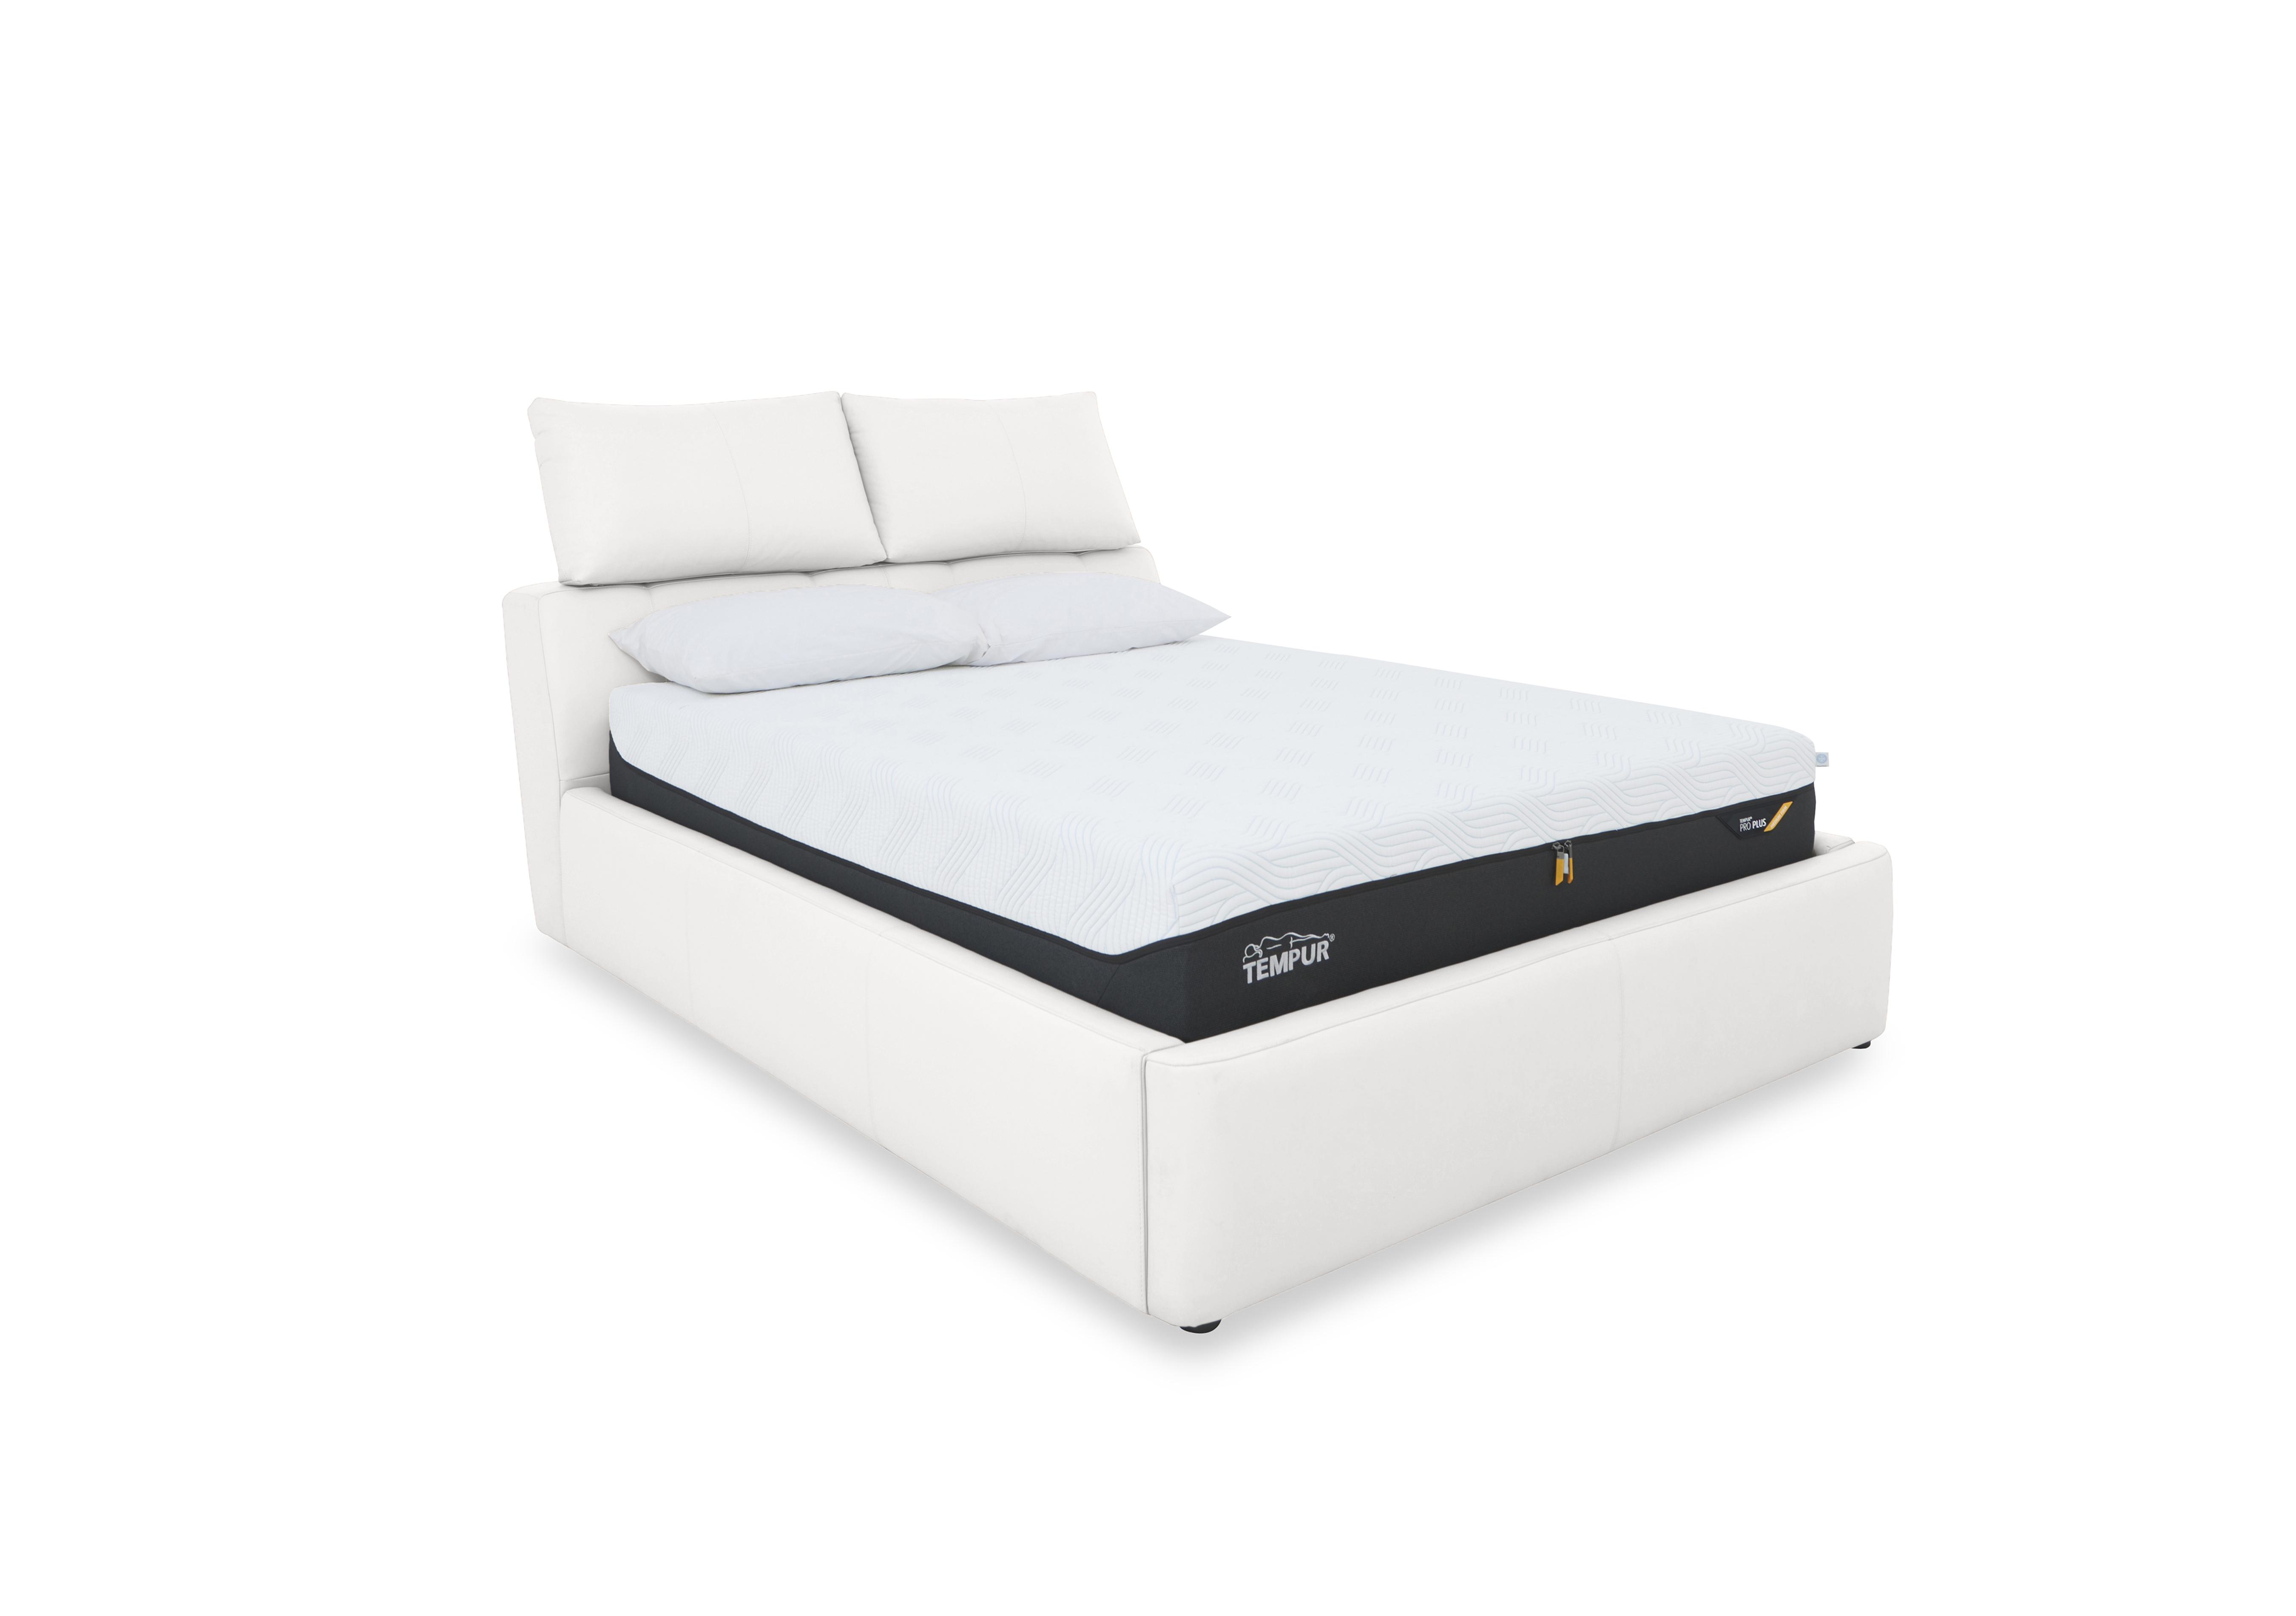 Tyrell Leather Manual Ottoman Bed Frame in Bv-744d Star White on Furniture Village